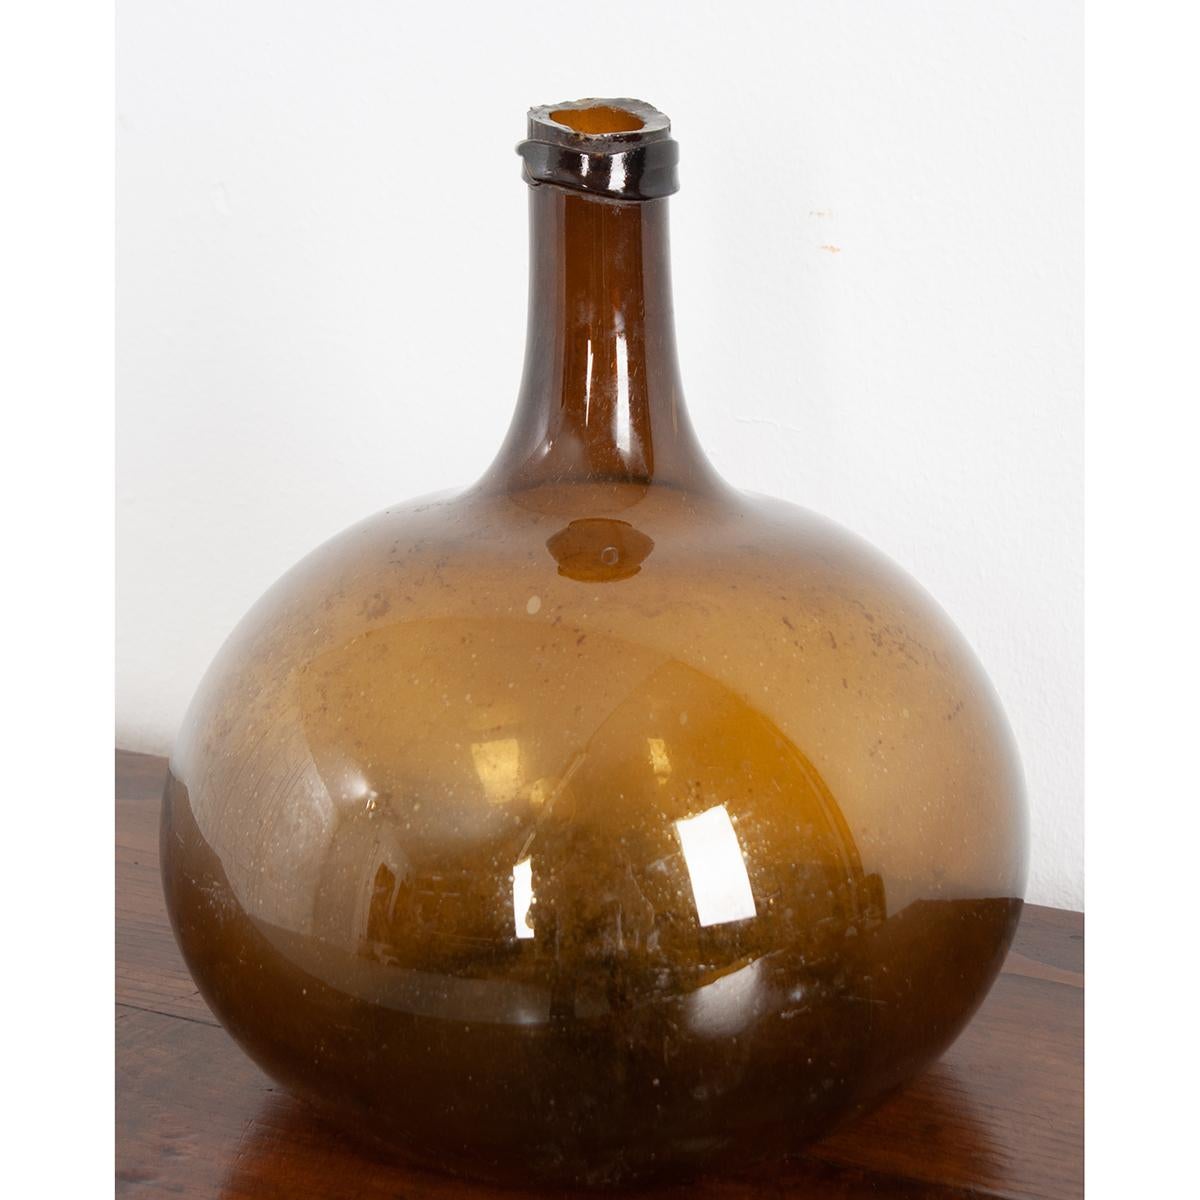 This amber color, blown glass wine keg, or demijohn as they are sometimes called, remains fully intact. Still in wonderful condition, this piece could be a vase and make a great addition to your space, giving it an element of texture and color.